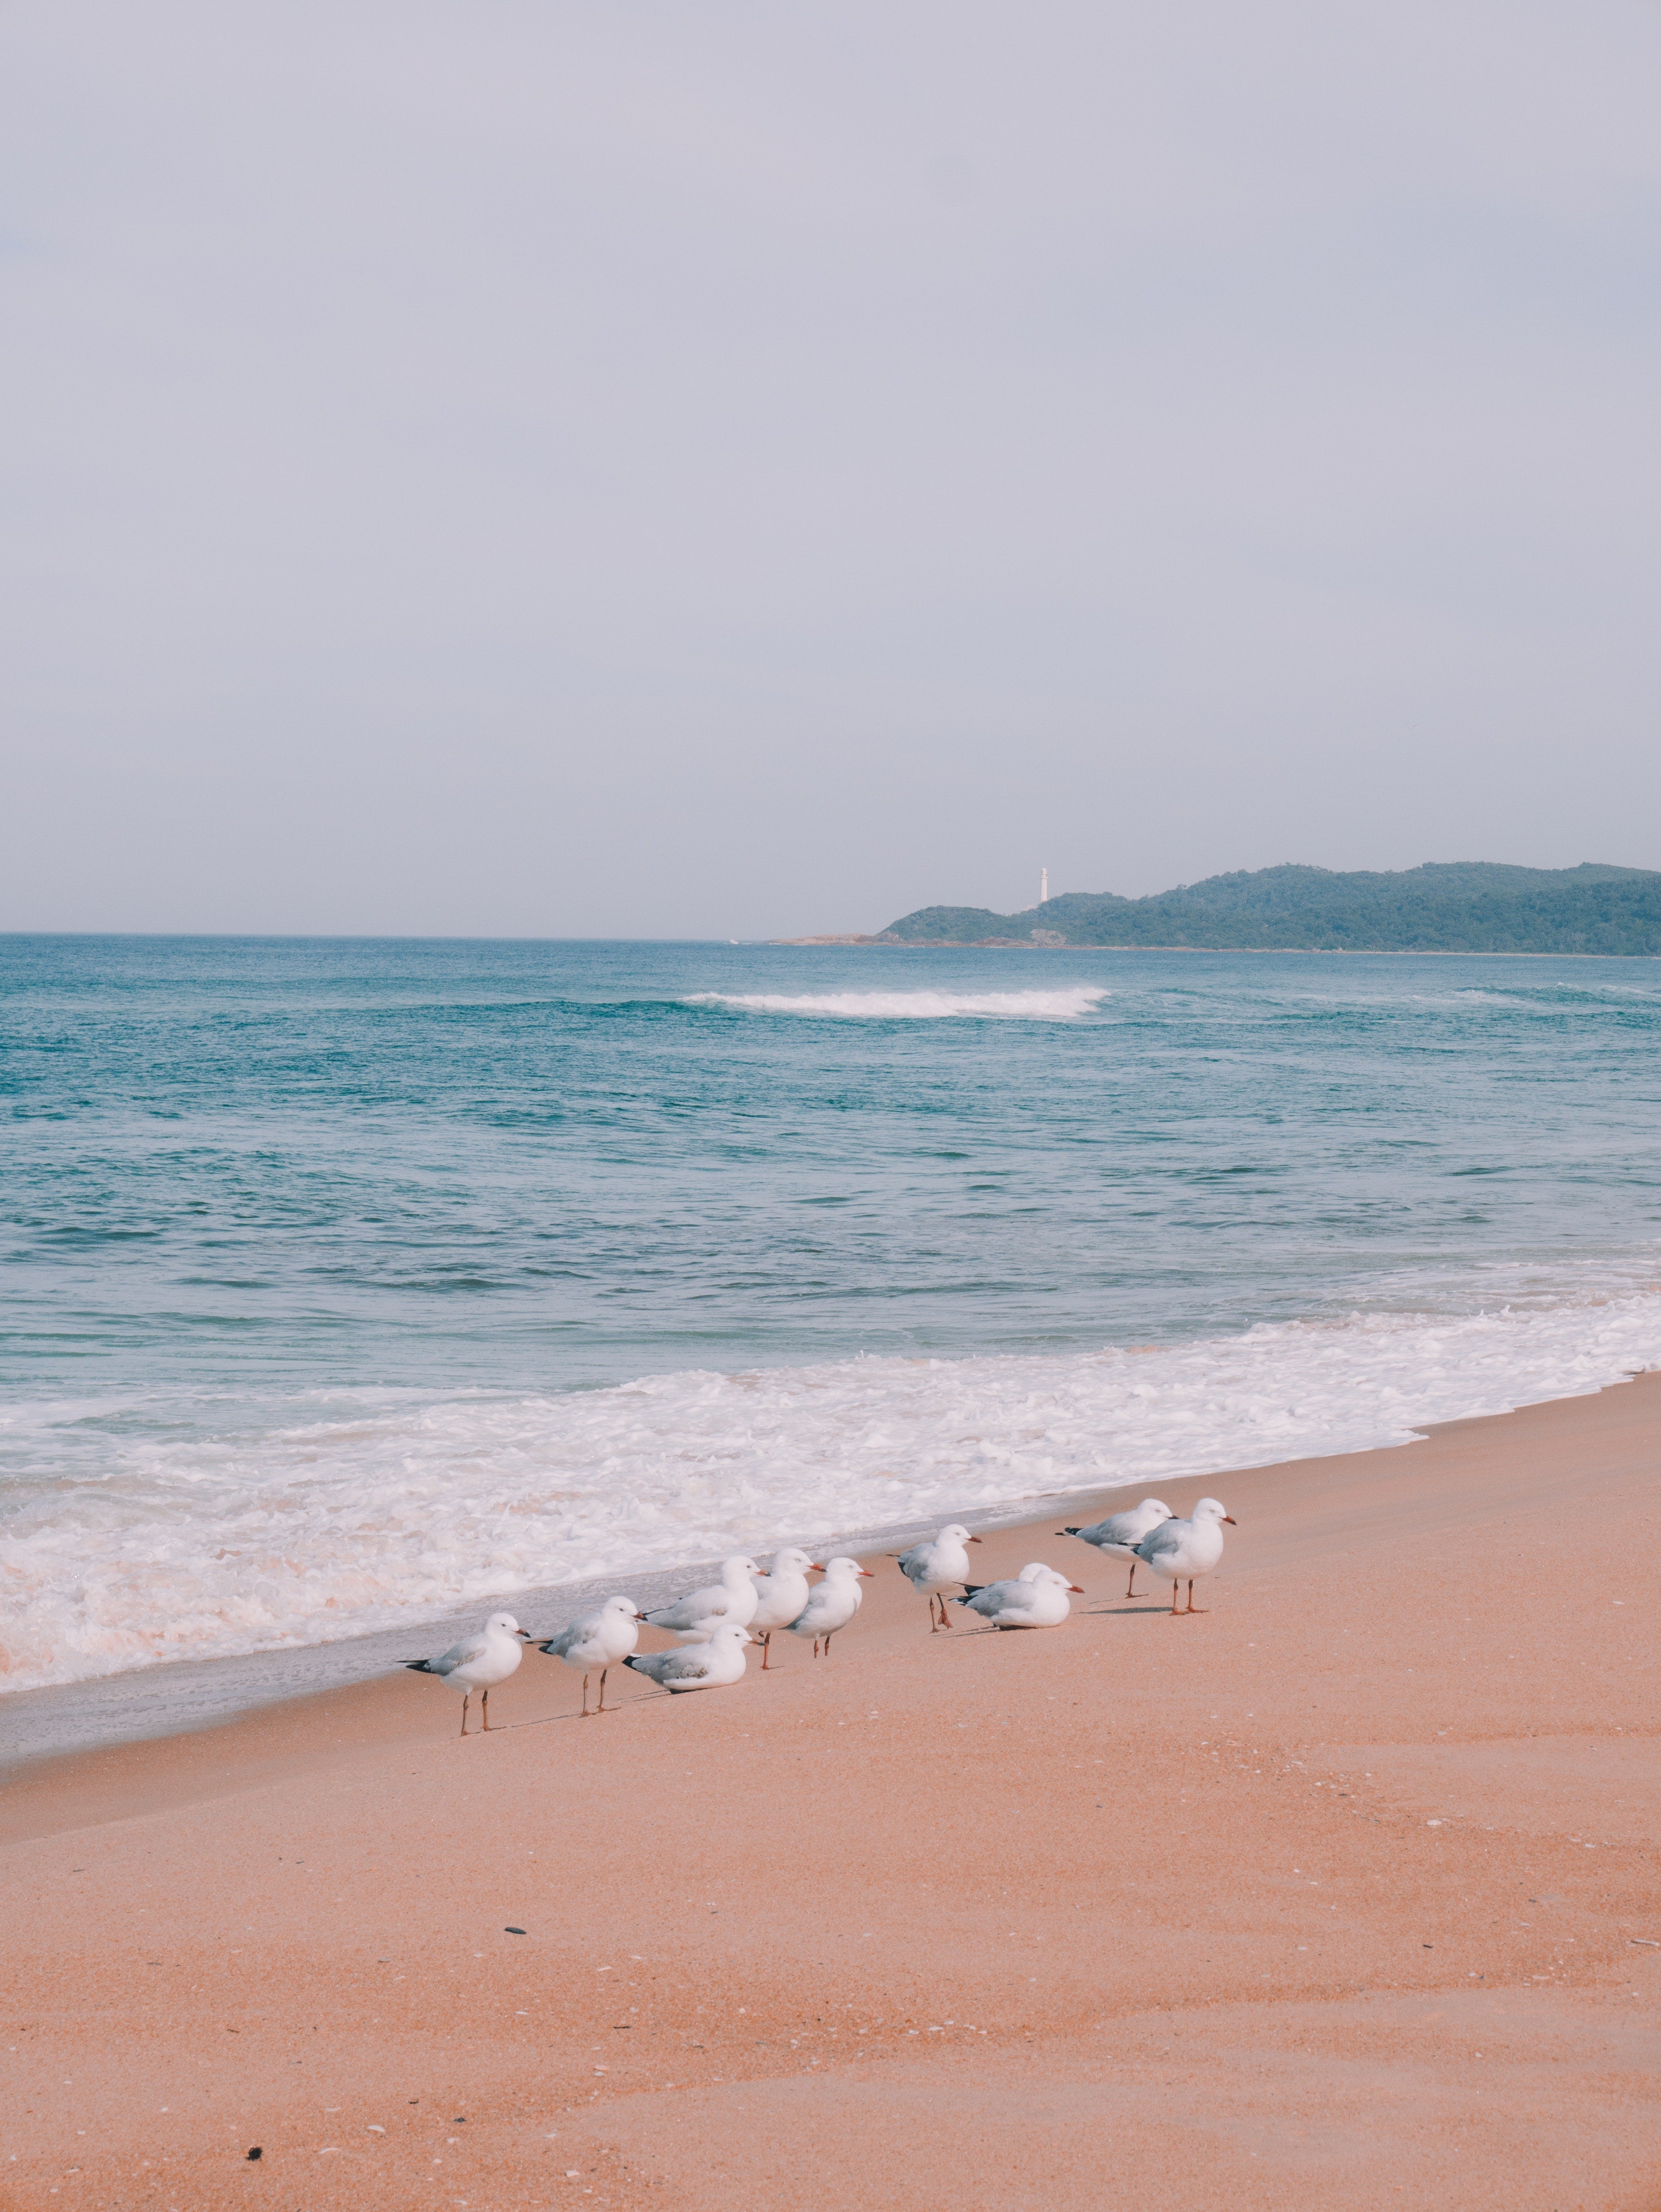 Image of the view from a Shorebird Beach Chair at the beach with seagulls next to the ocean